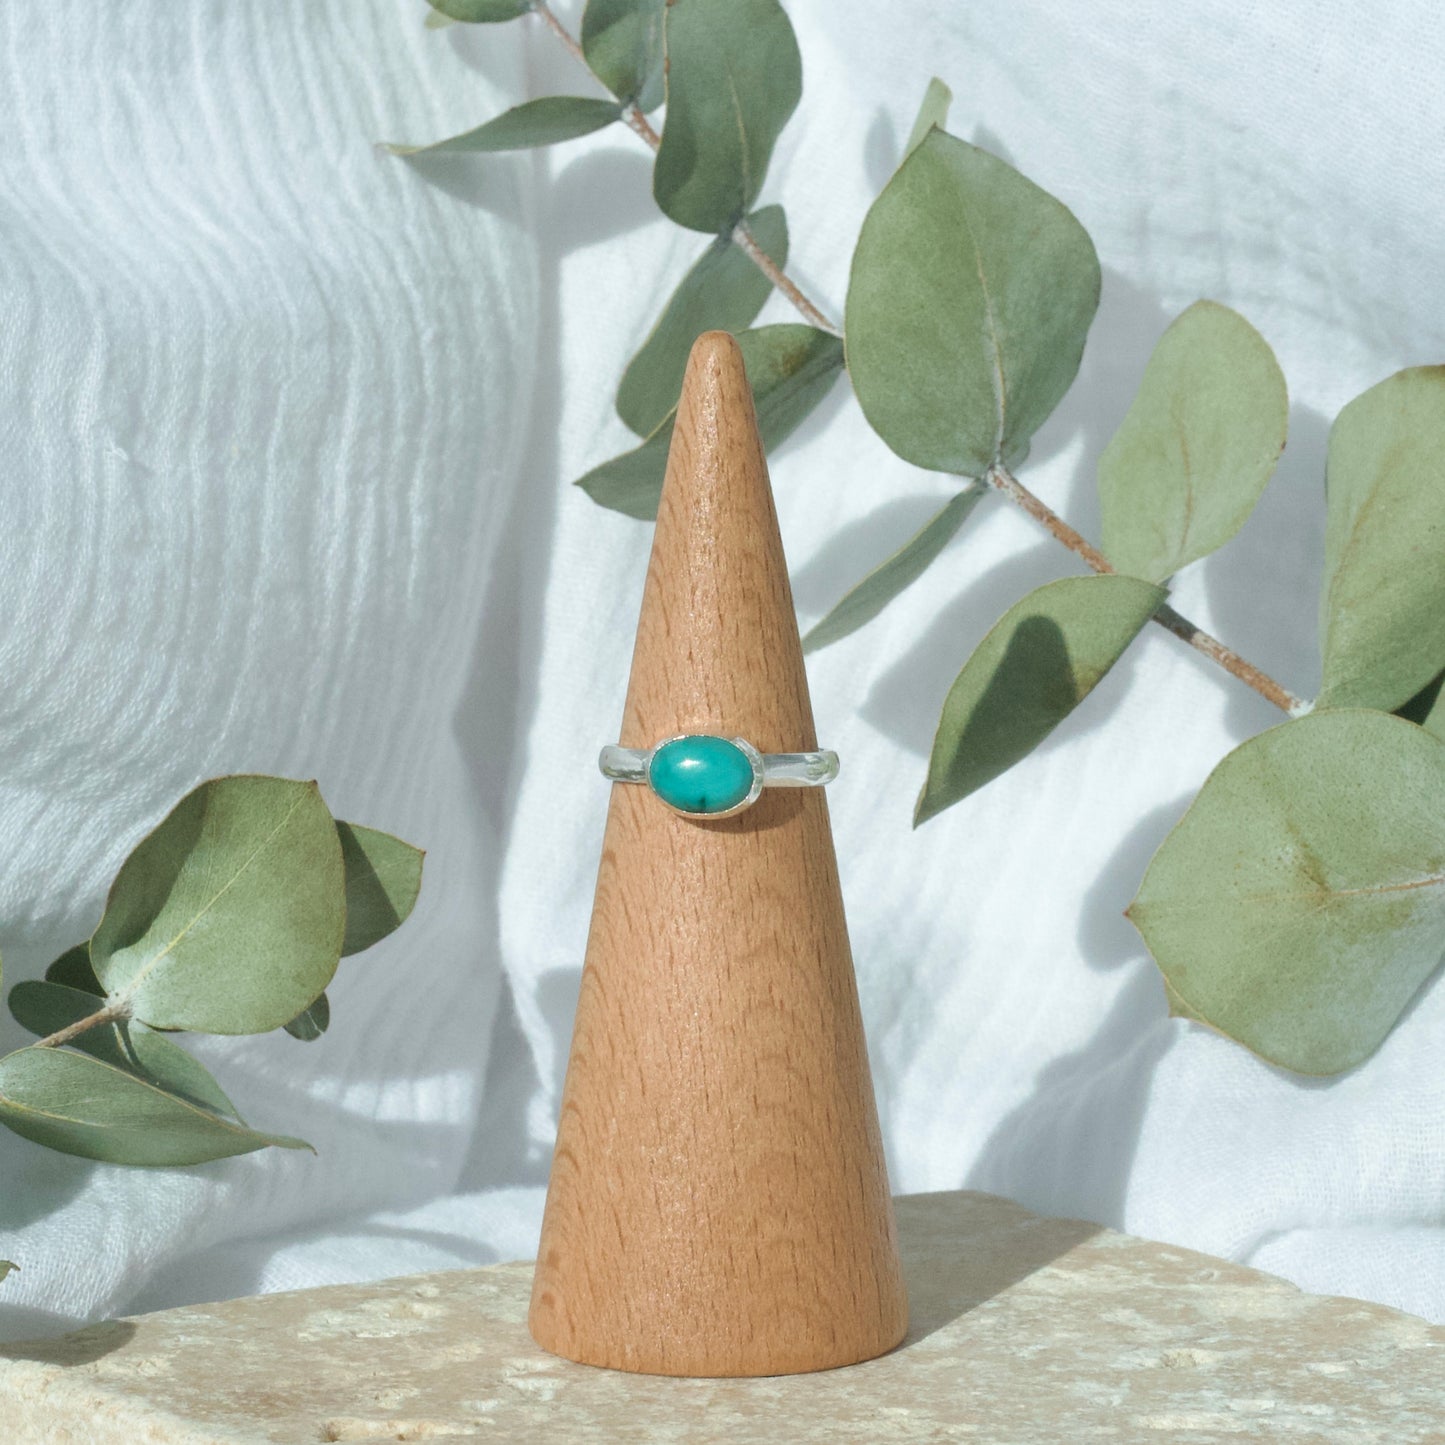 Turquoise Ring - 5.5